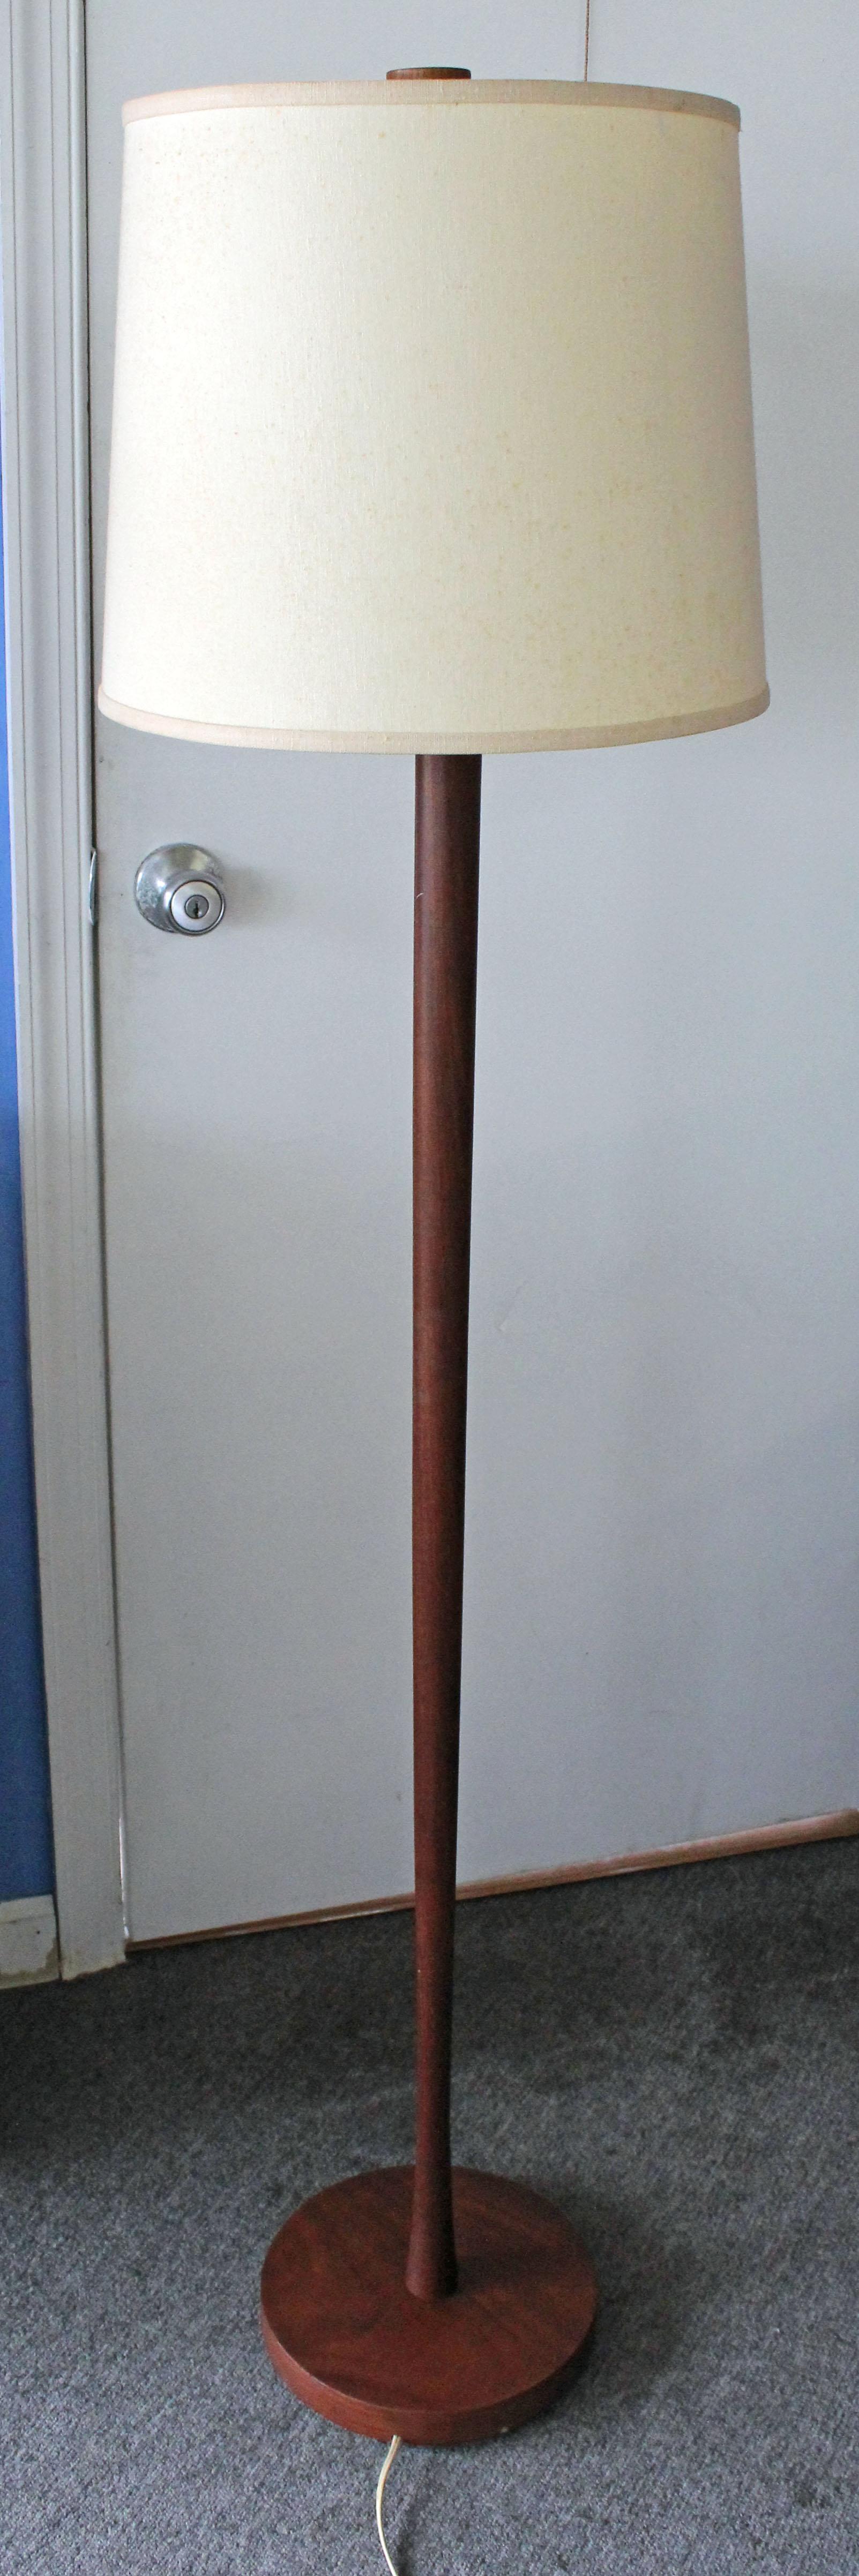 Offered is a vintage, Mid-Century Modern teak floor lamp. It is in great, working condition showing minor age wear (see photos: shade is not included, lighting tested, rust on harp, minor surface wear). It is unmarked. Really cool lighting for any